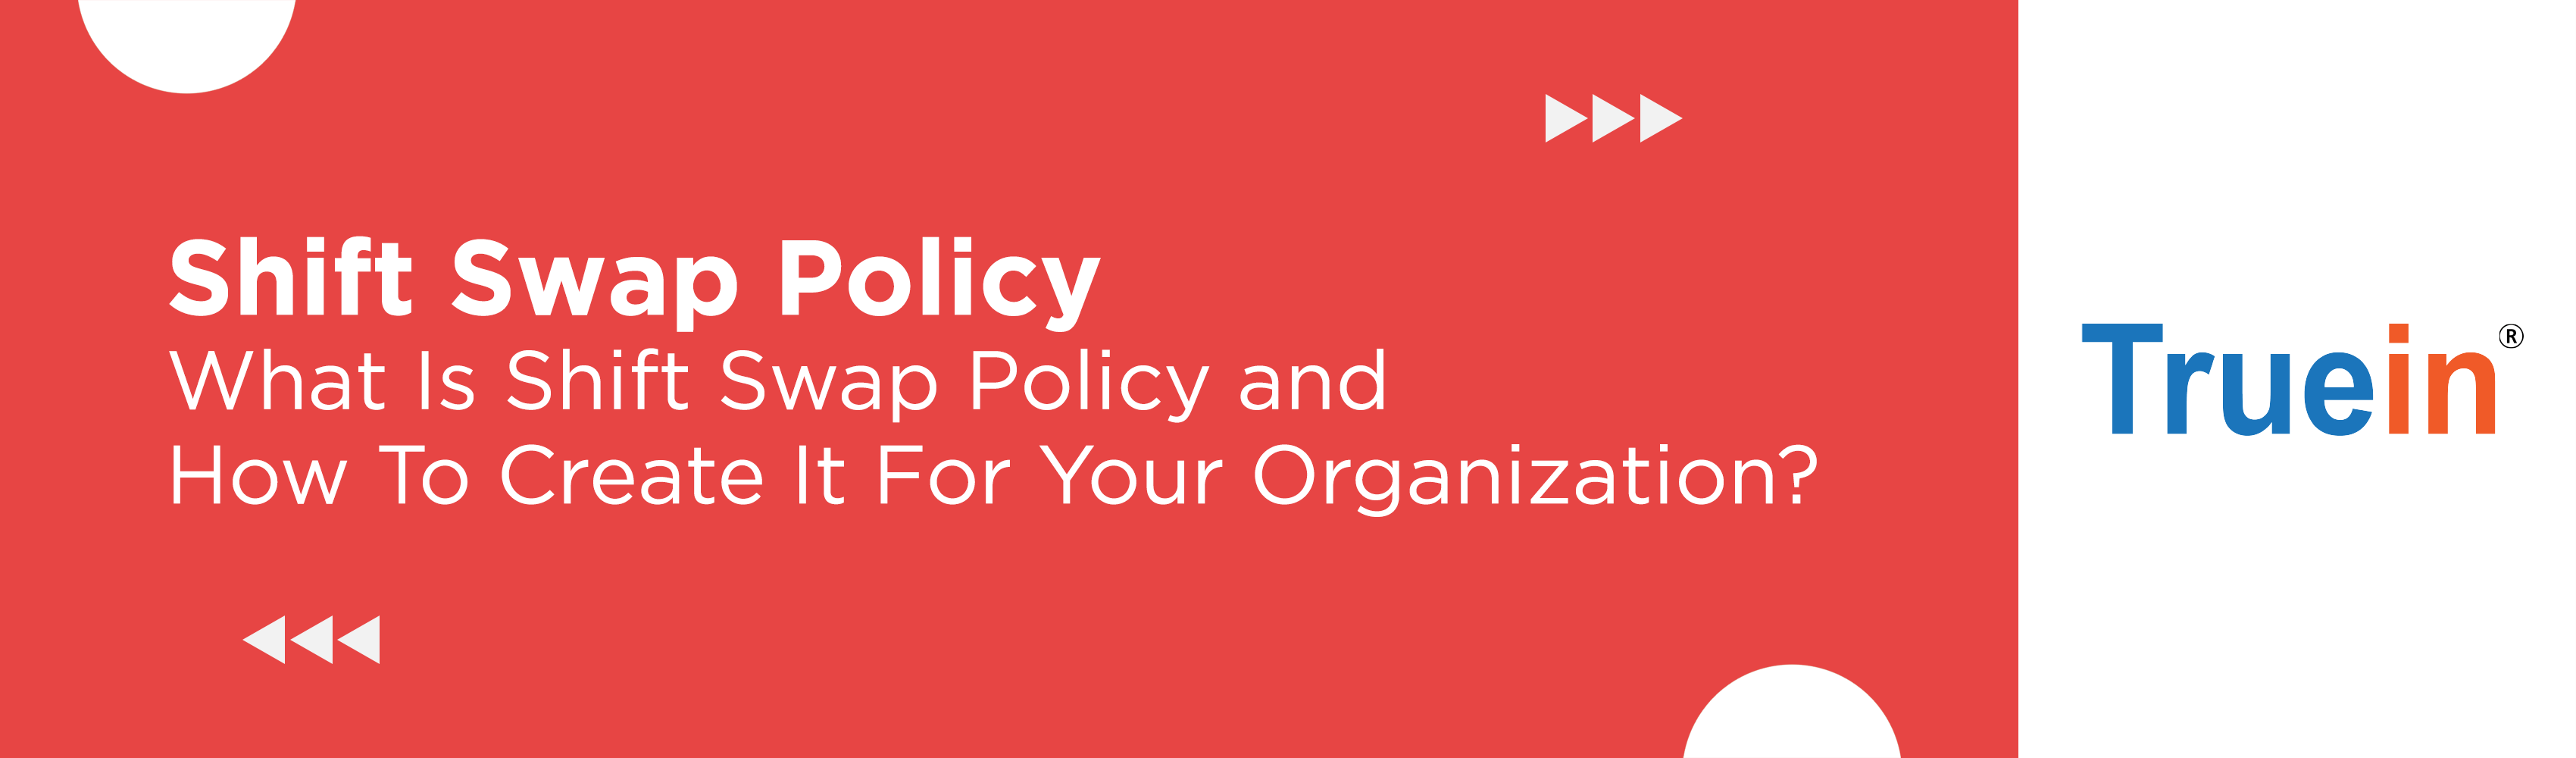 What Is Shift Swap Policy and How To Create It For Your Organization?